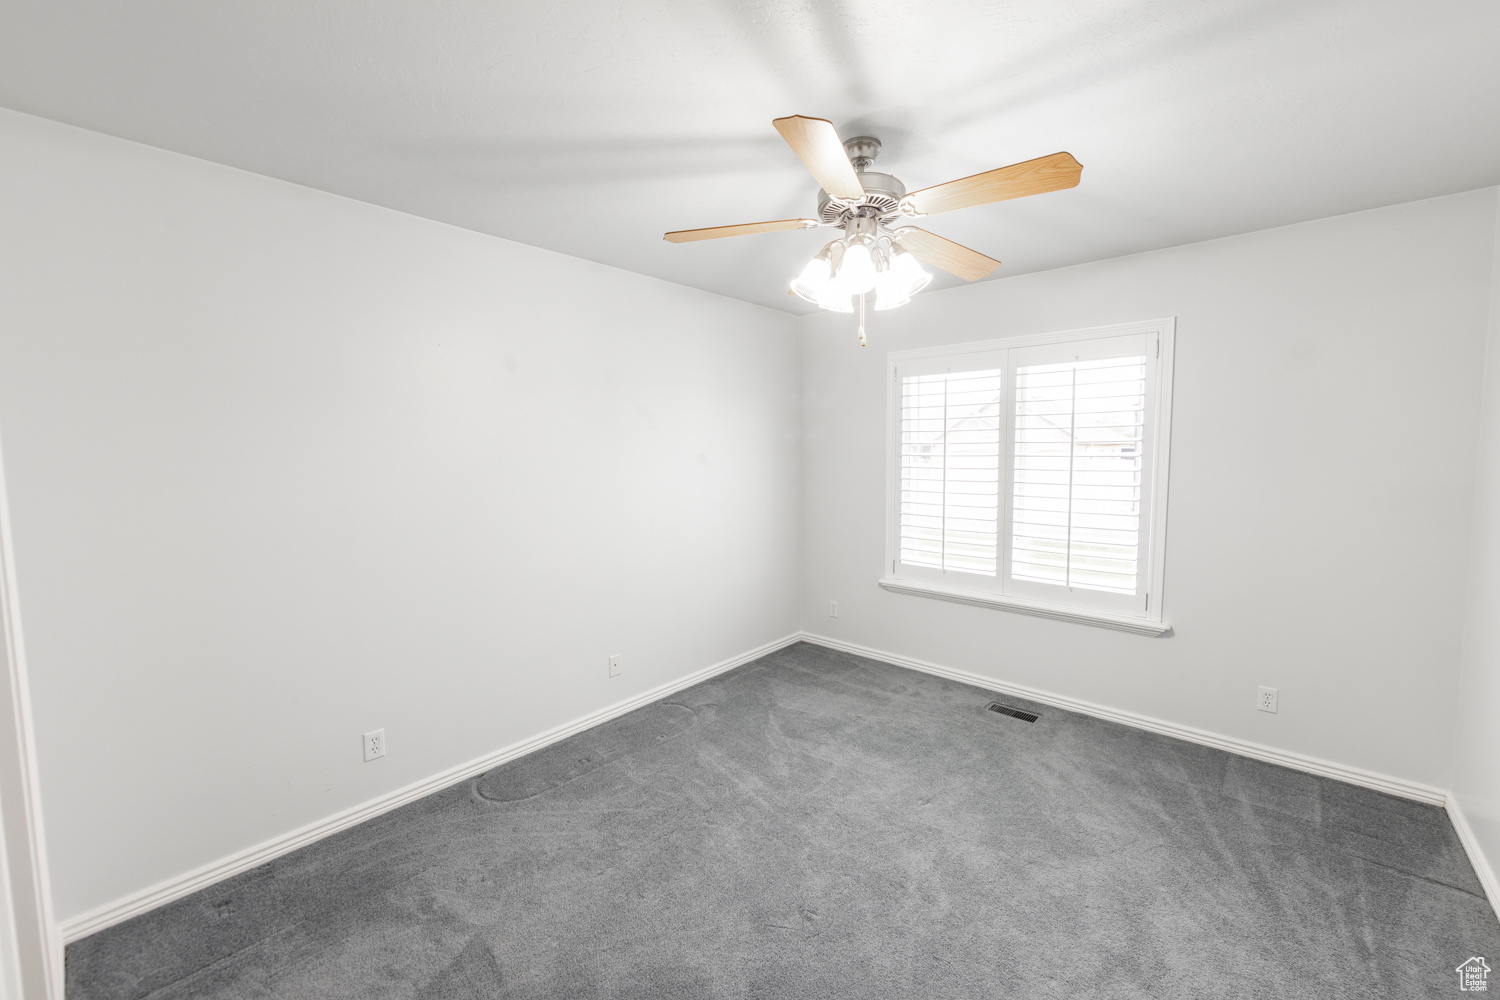 3rd upstairs Bedroom room featuring ceiling fan